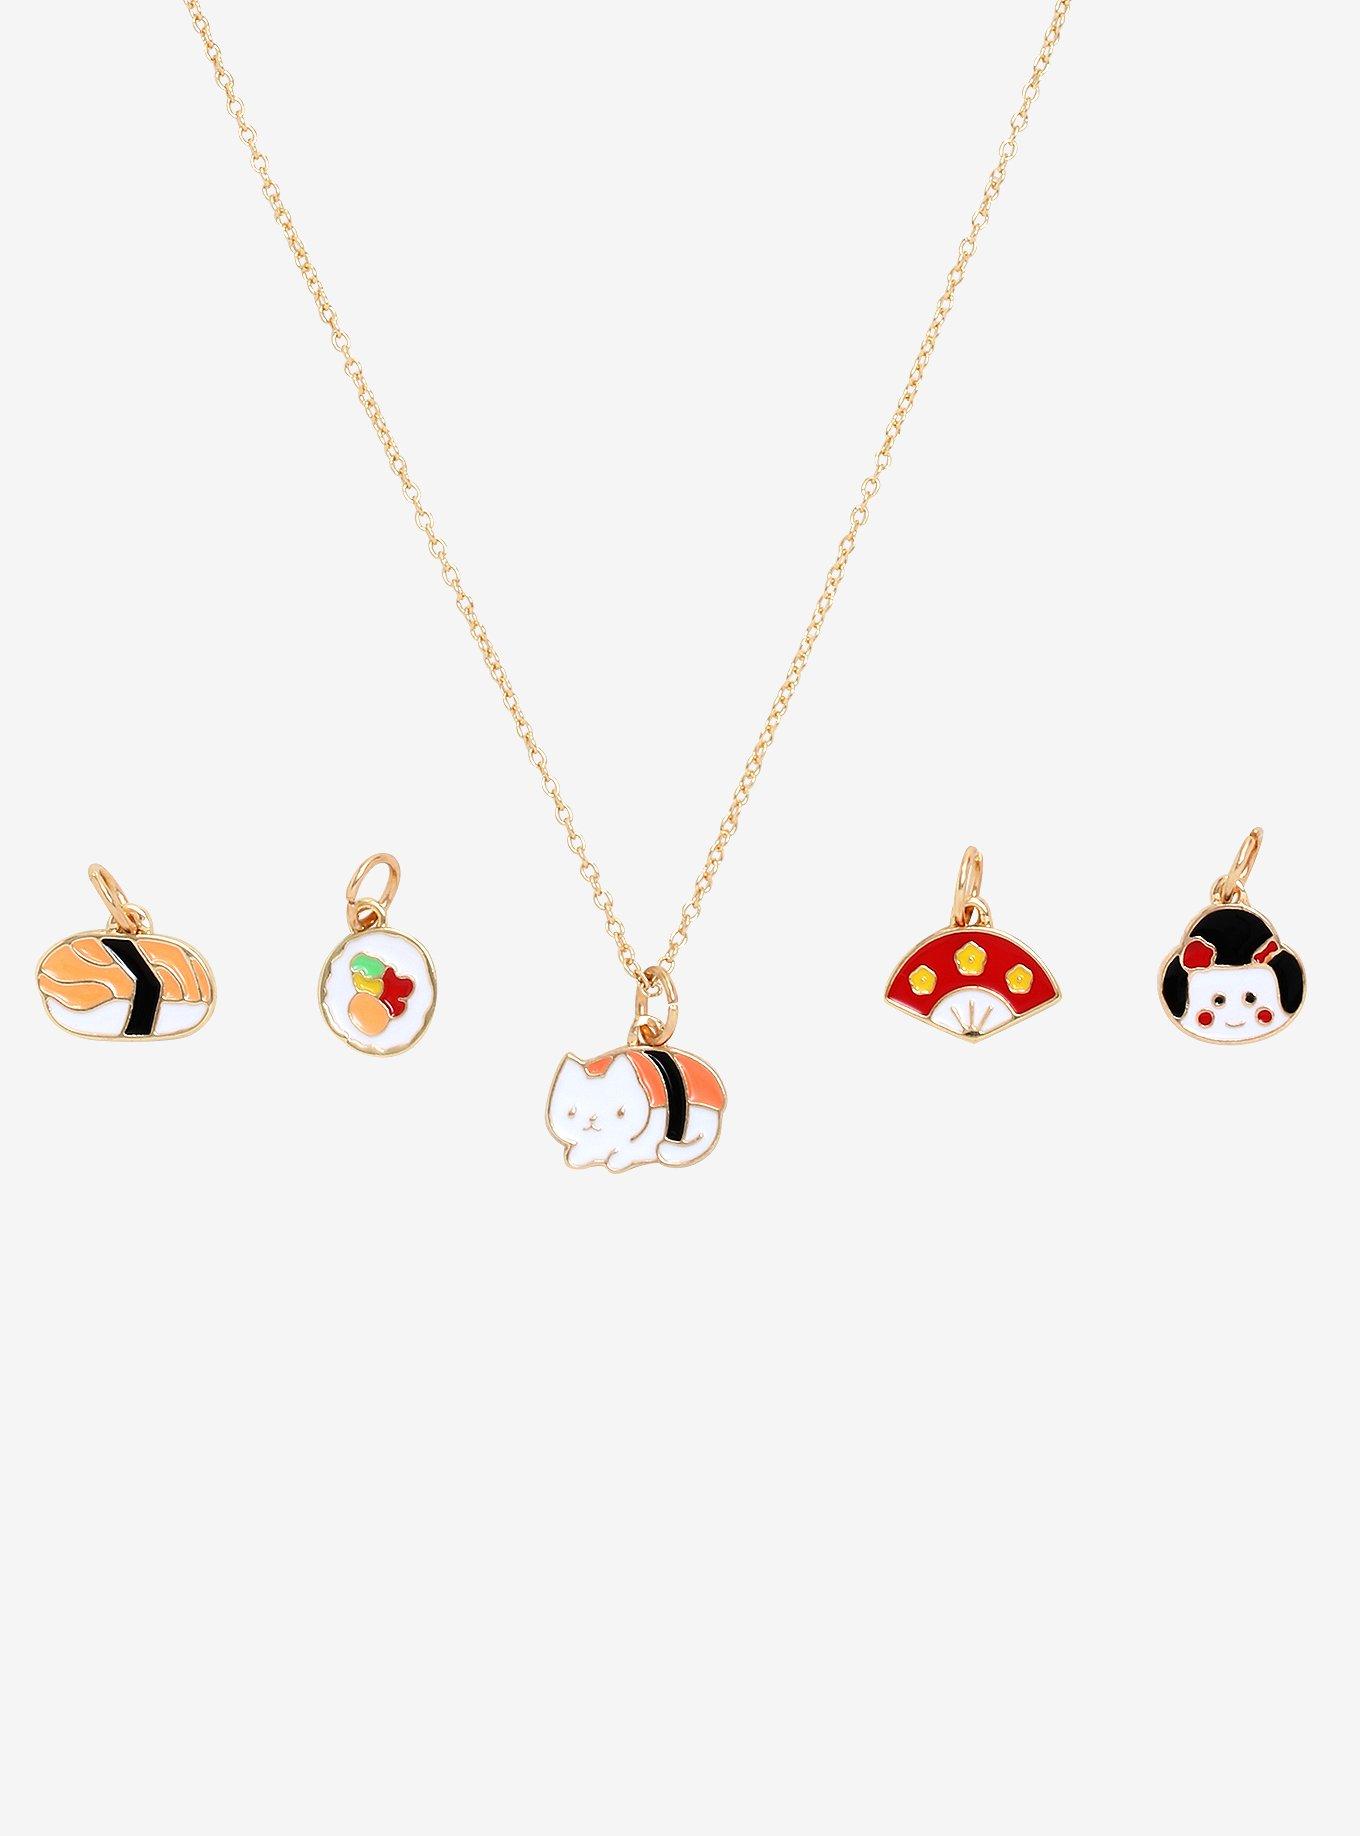 Kawaii Interchangeable Charms Necklace Set, , hi-res